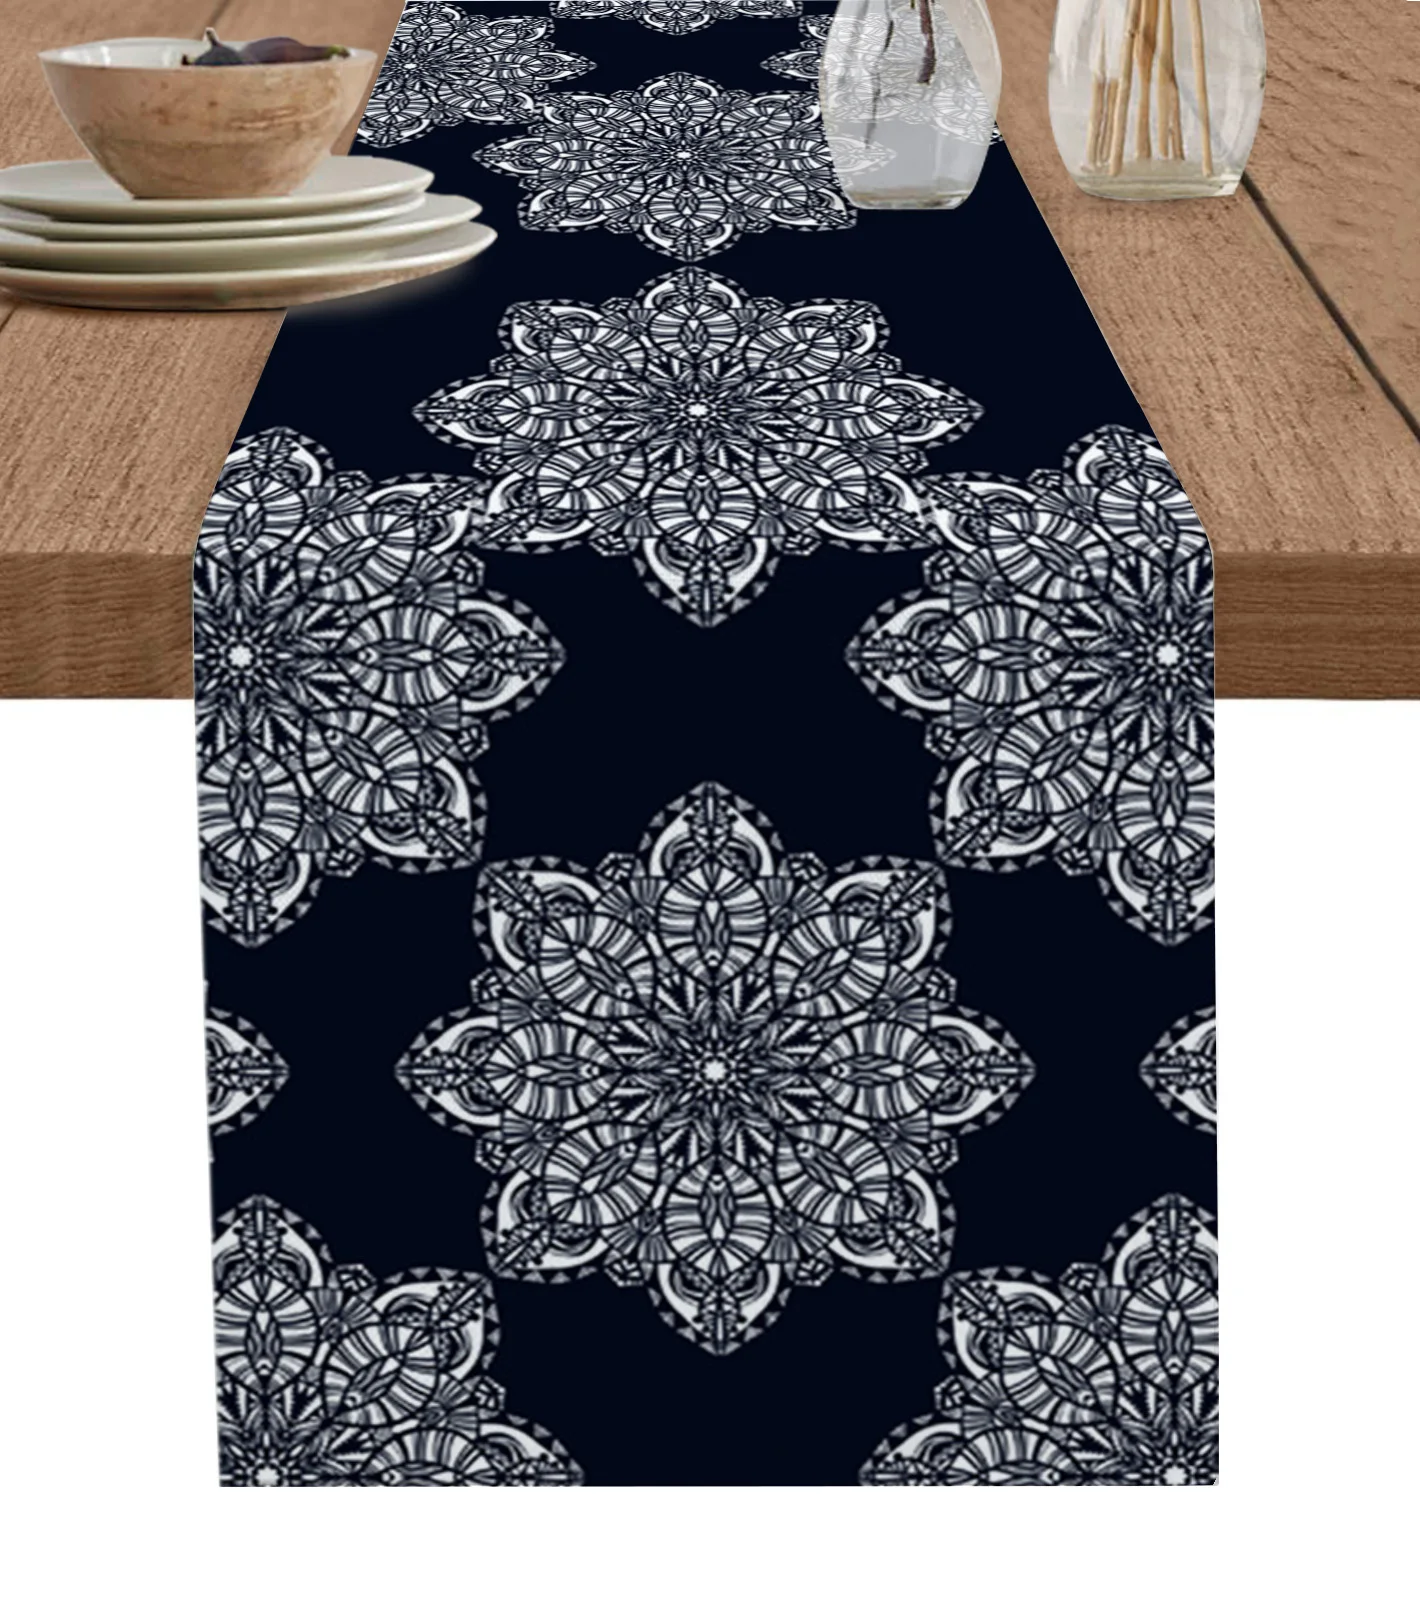 

Mandala Abstract Flower Table Runner Christmas Decoration Tablecloth Wedding Party Decor Table Cover